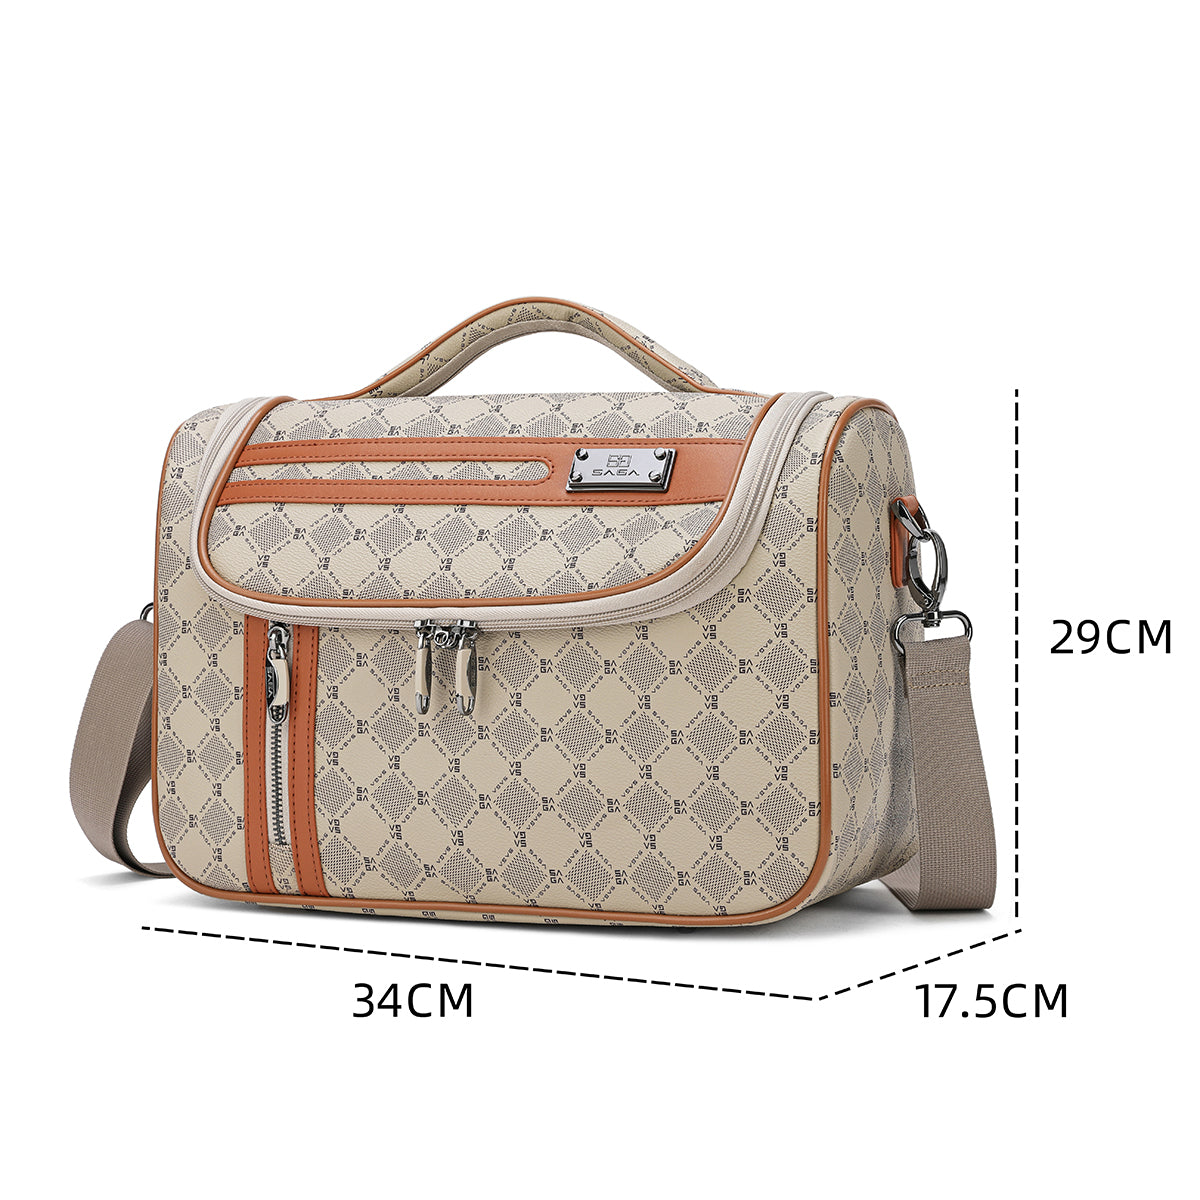 A luxurious and extremely durable travel bag in several sizes, khaki colour